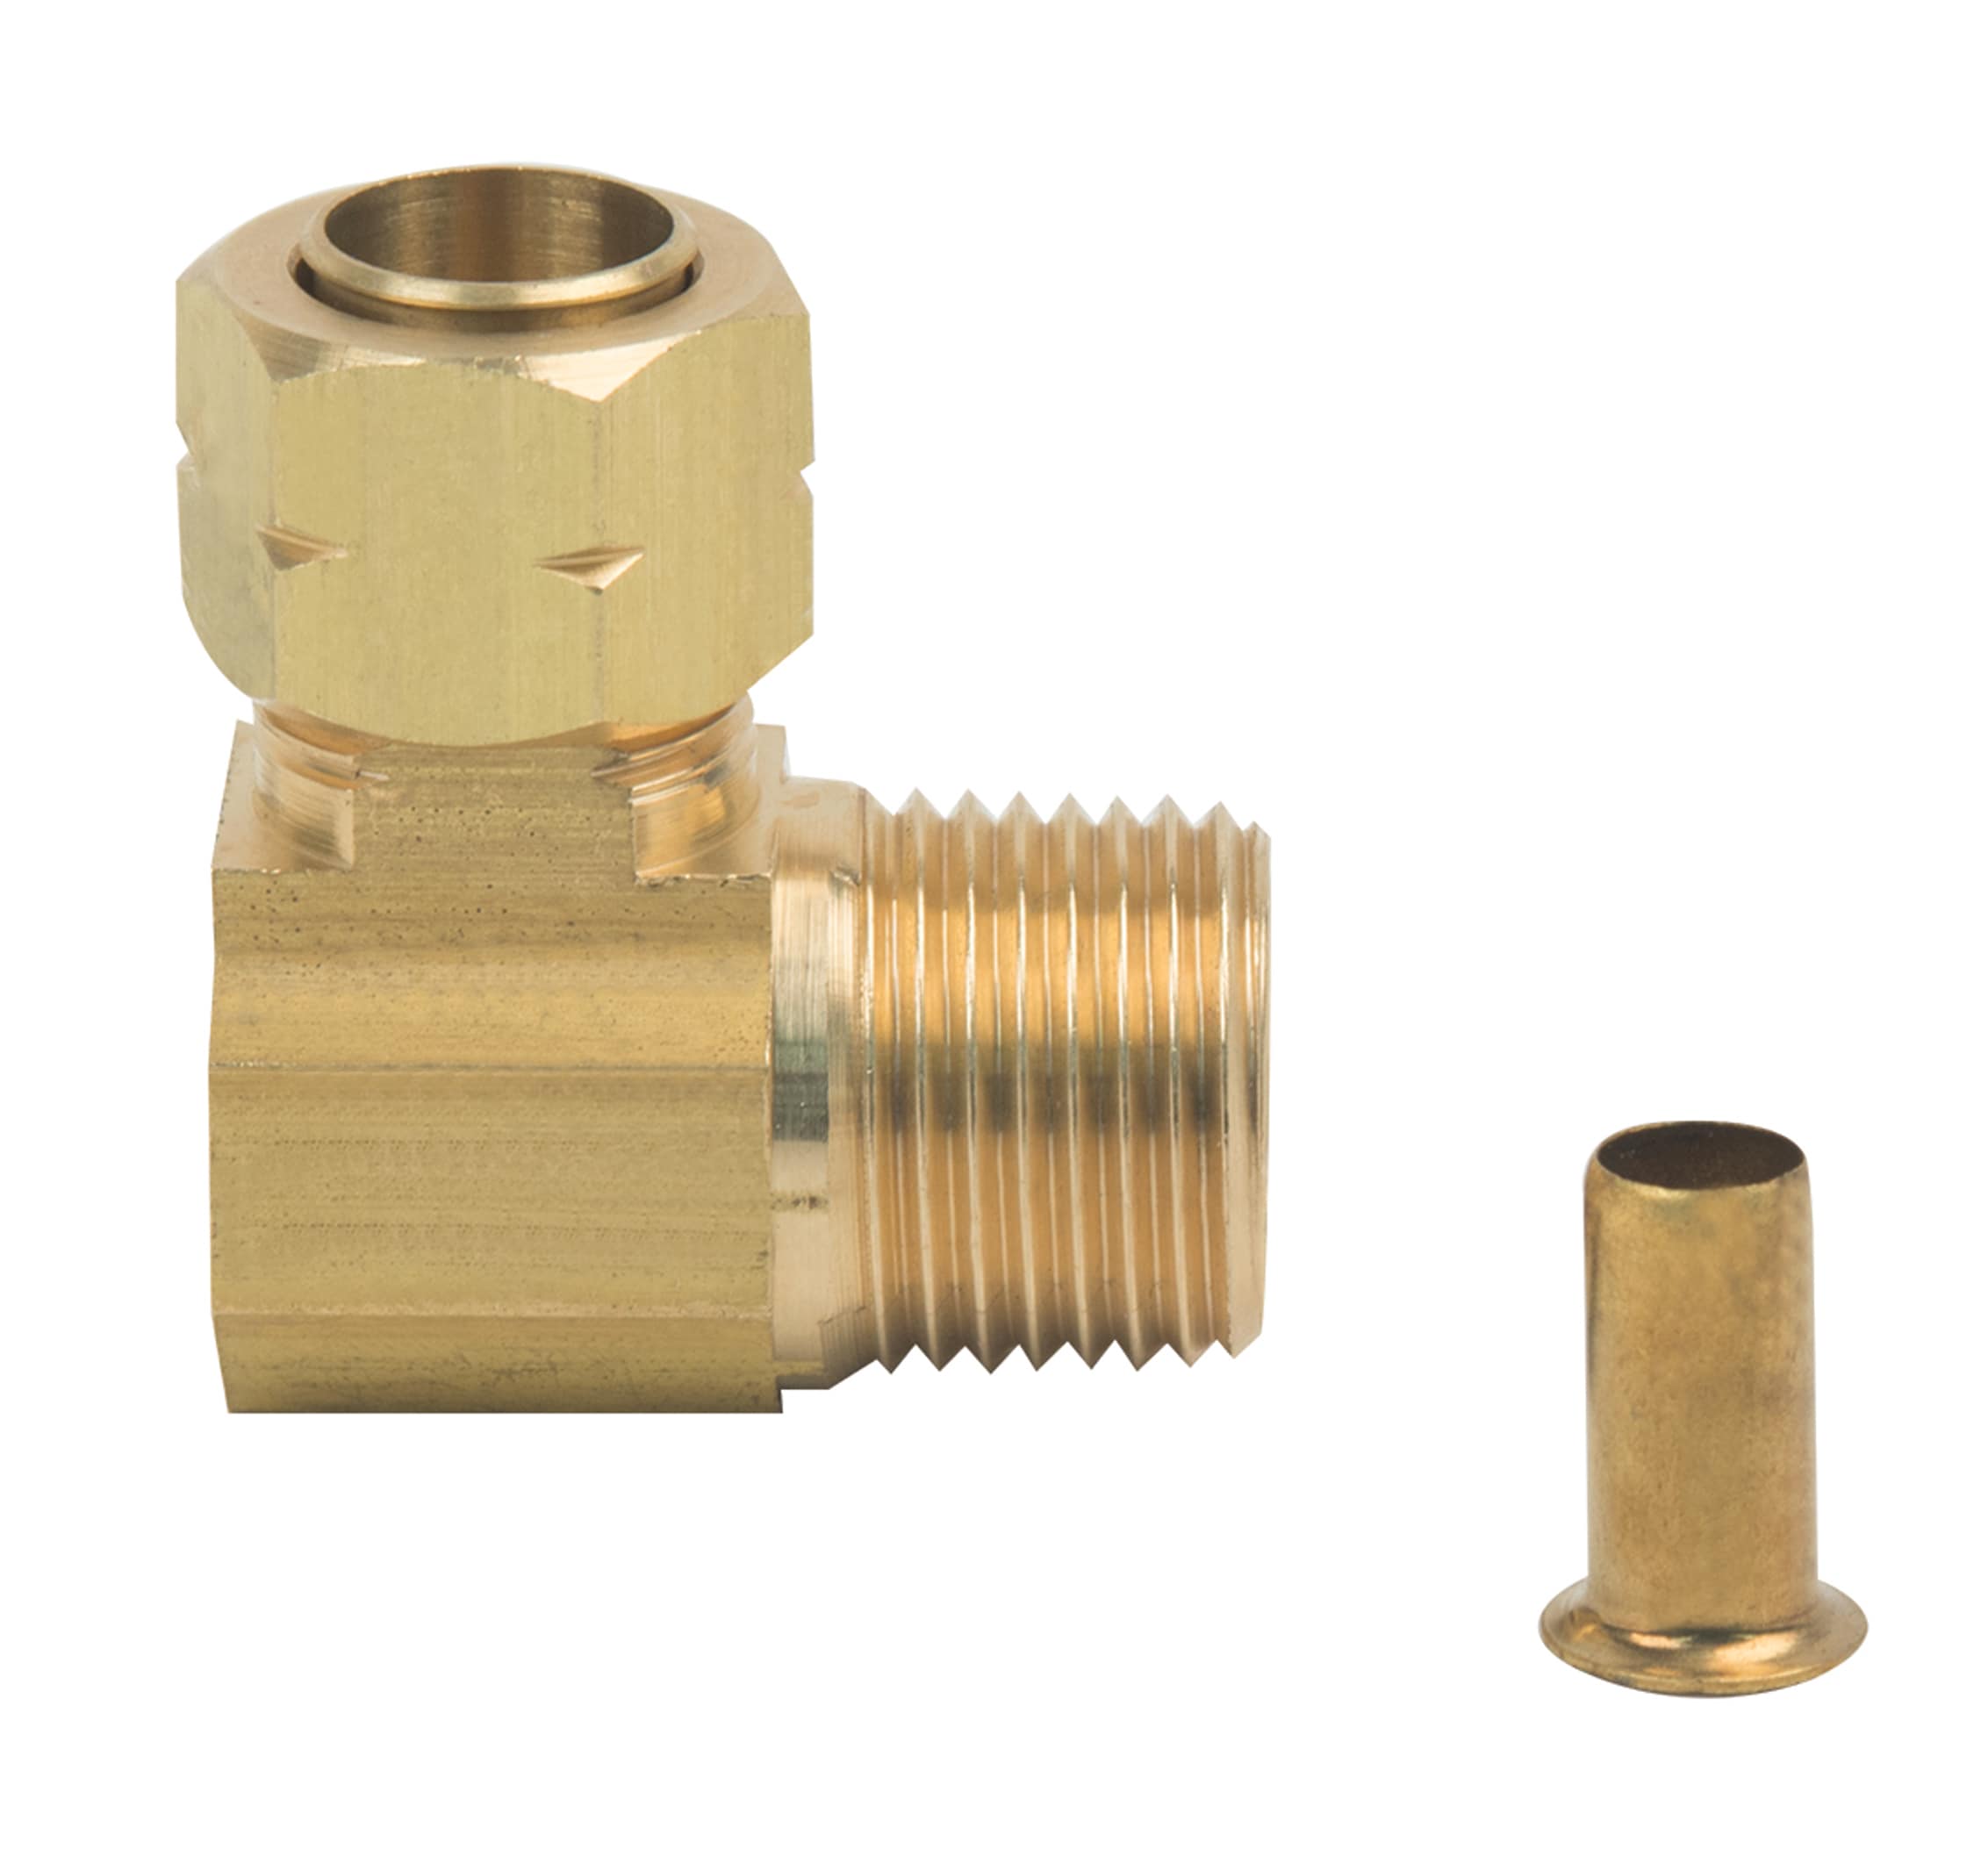 Elbow compression ring fitting G 3/8-10 (M16x1.5)mm, brass